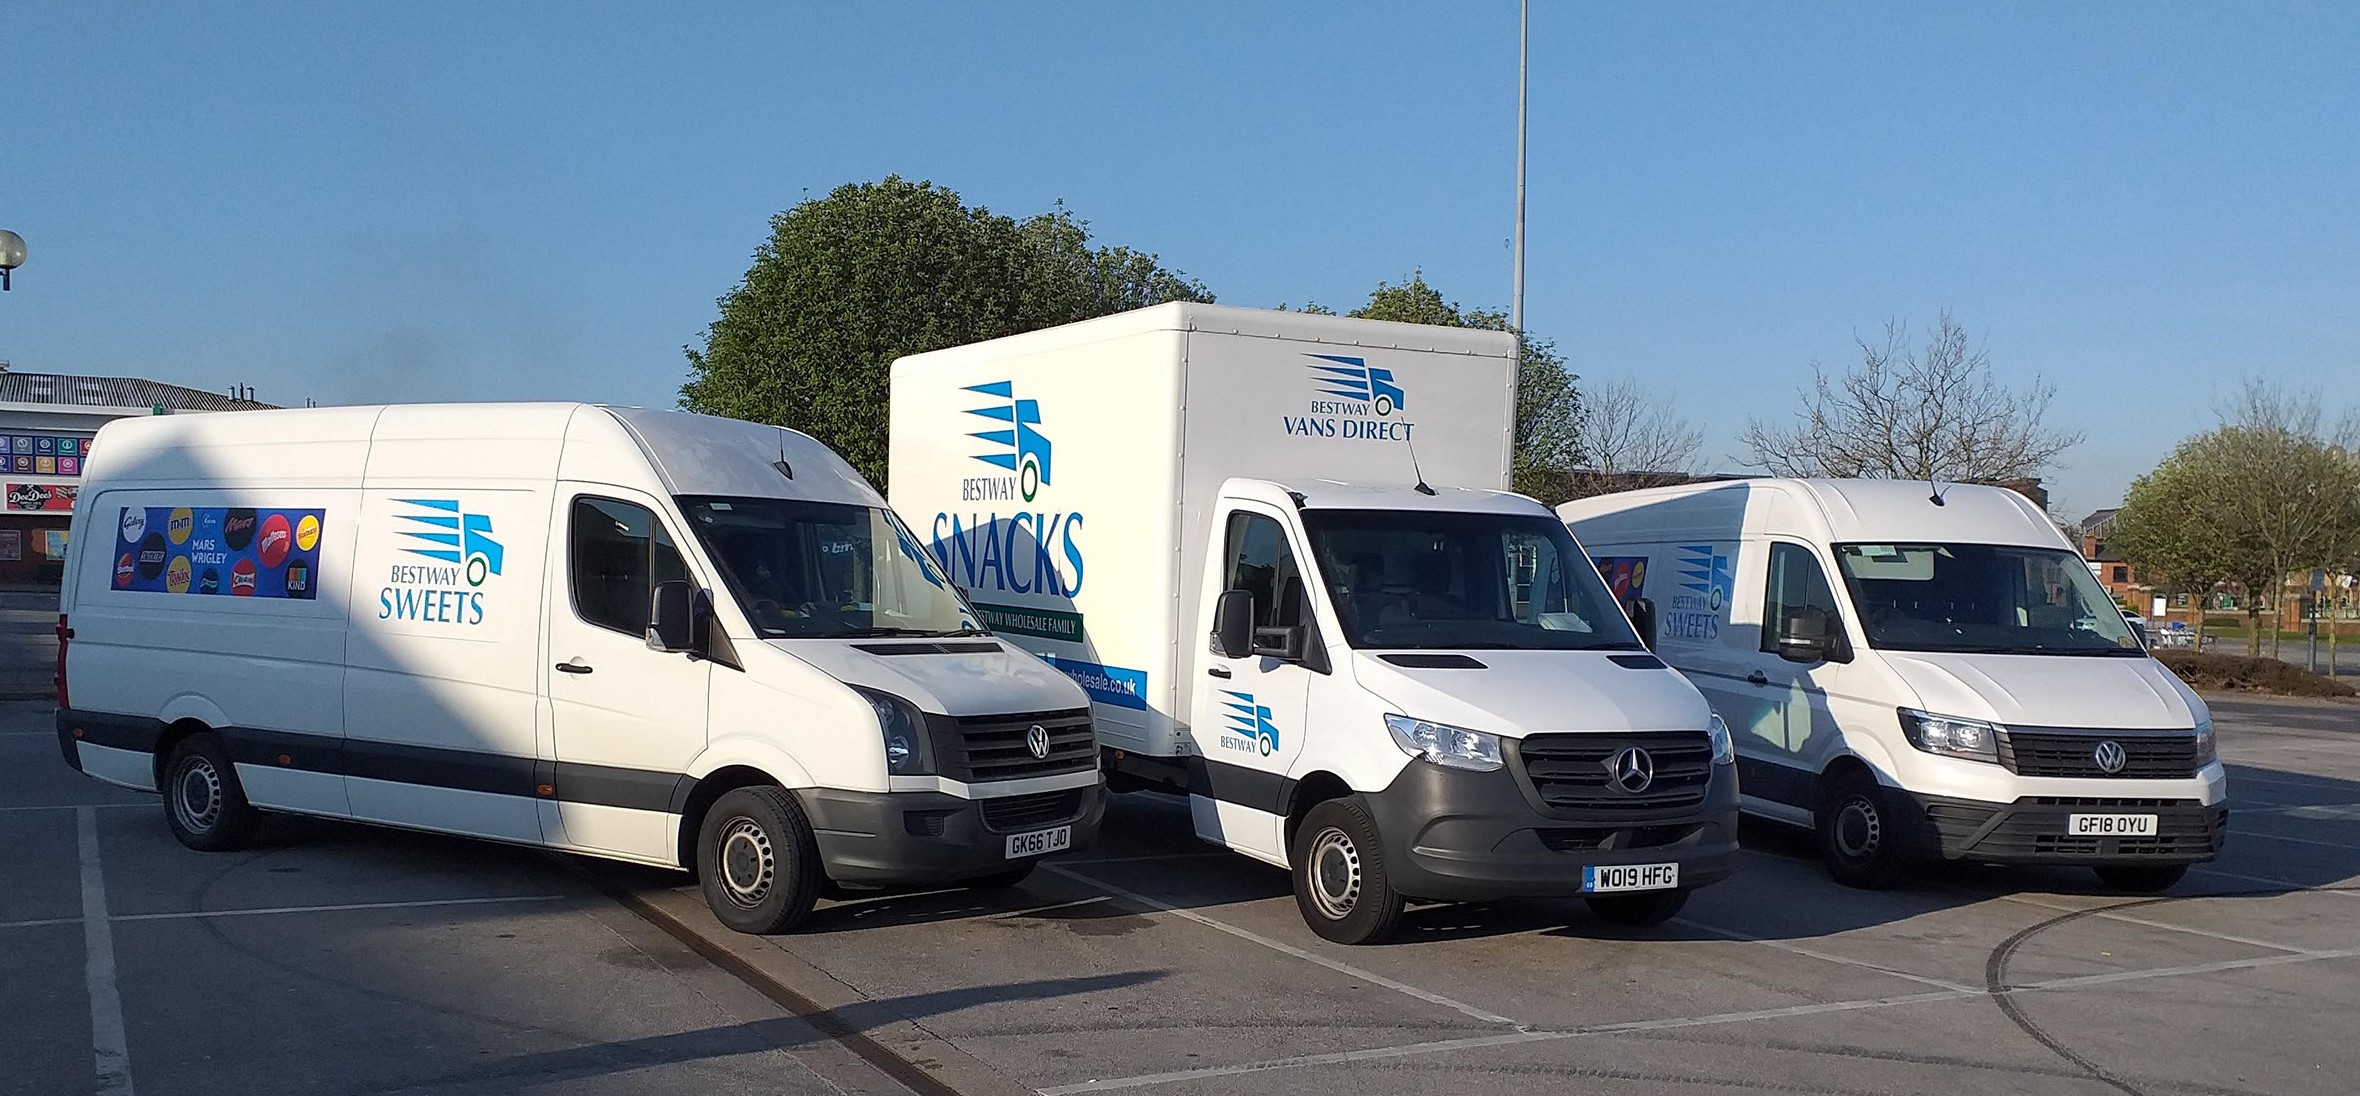 Bestway Vans delivers another year of customer growth